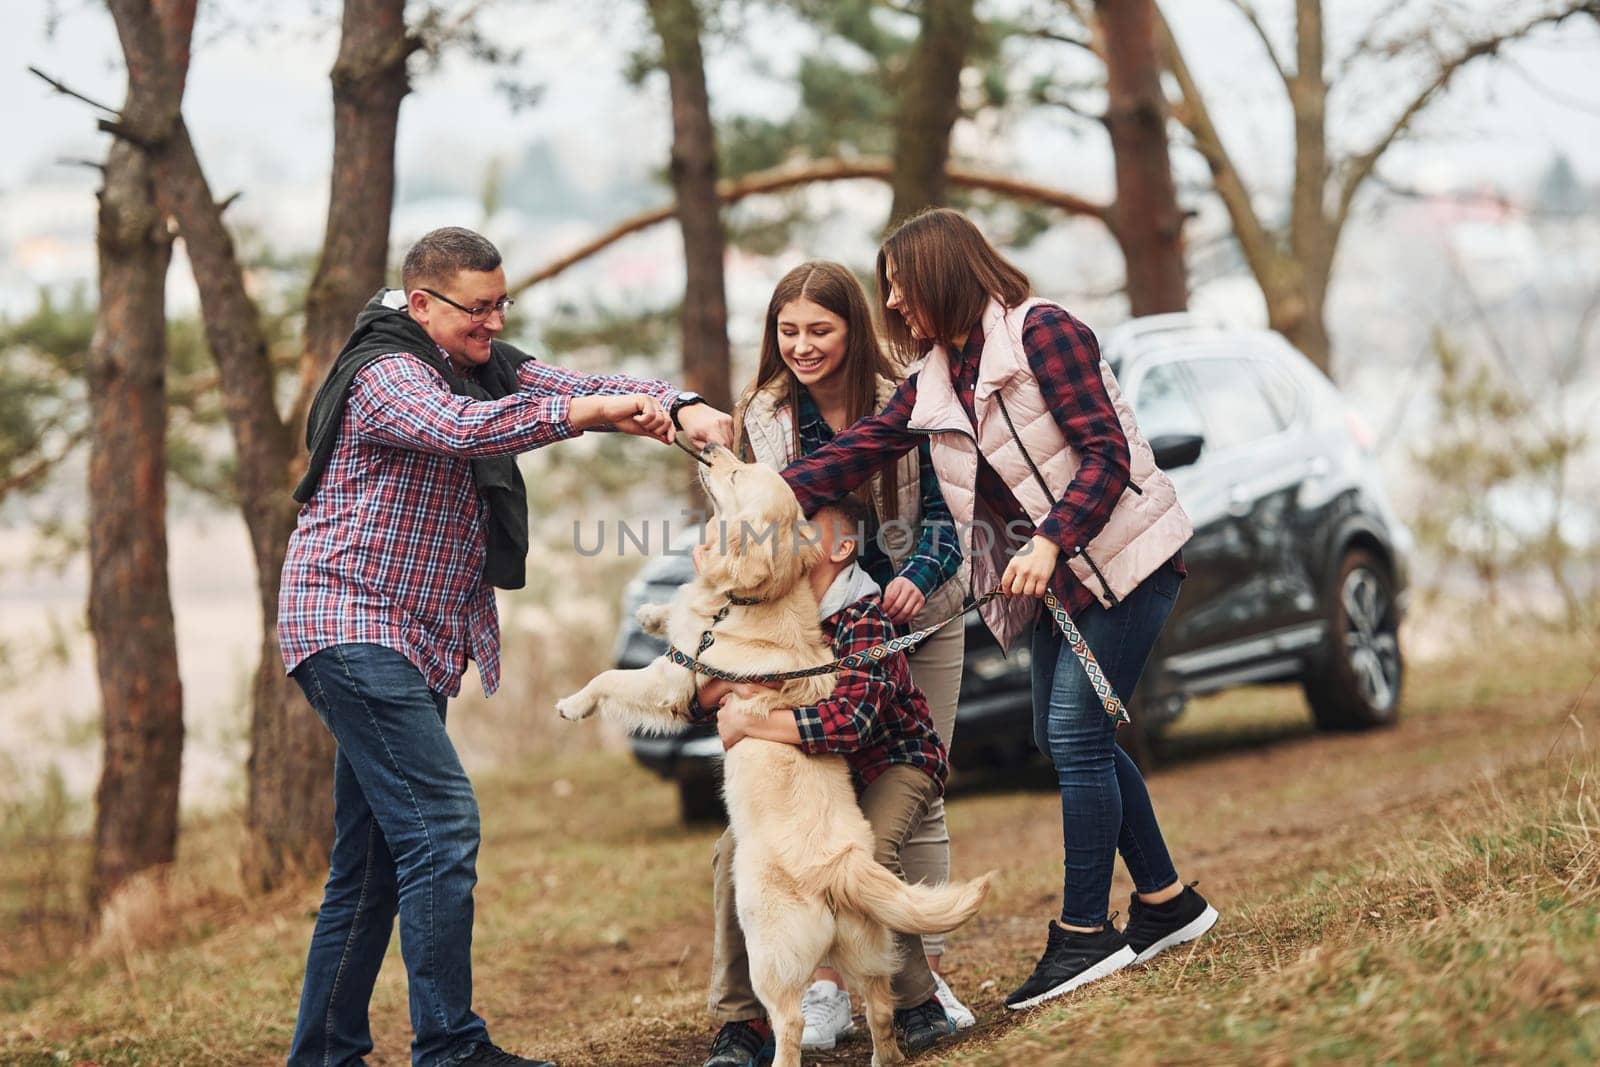 Happy family have fun with their active dog near modern car outdoors in forest.